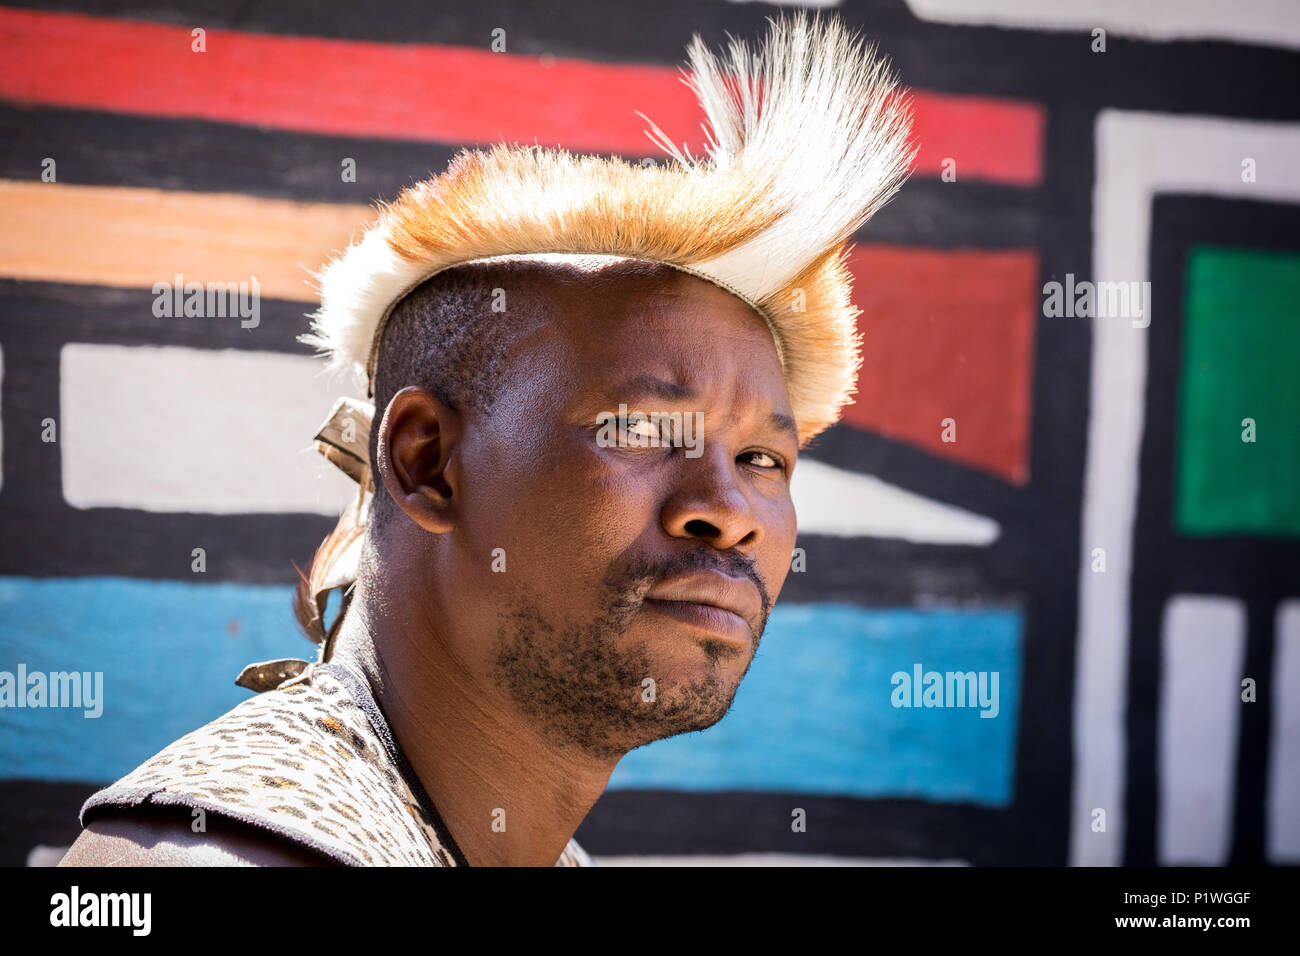 Lesedi Cultural Village, SOUTH AFRICA - 4 November 2016: Portrait of a Zulu Warrior wearing impala skin headdress. Zulu is one of the five main tribes Stock Photo